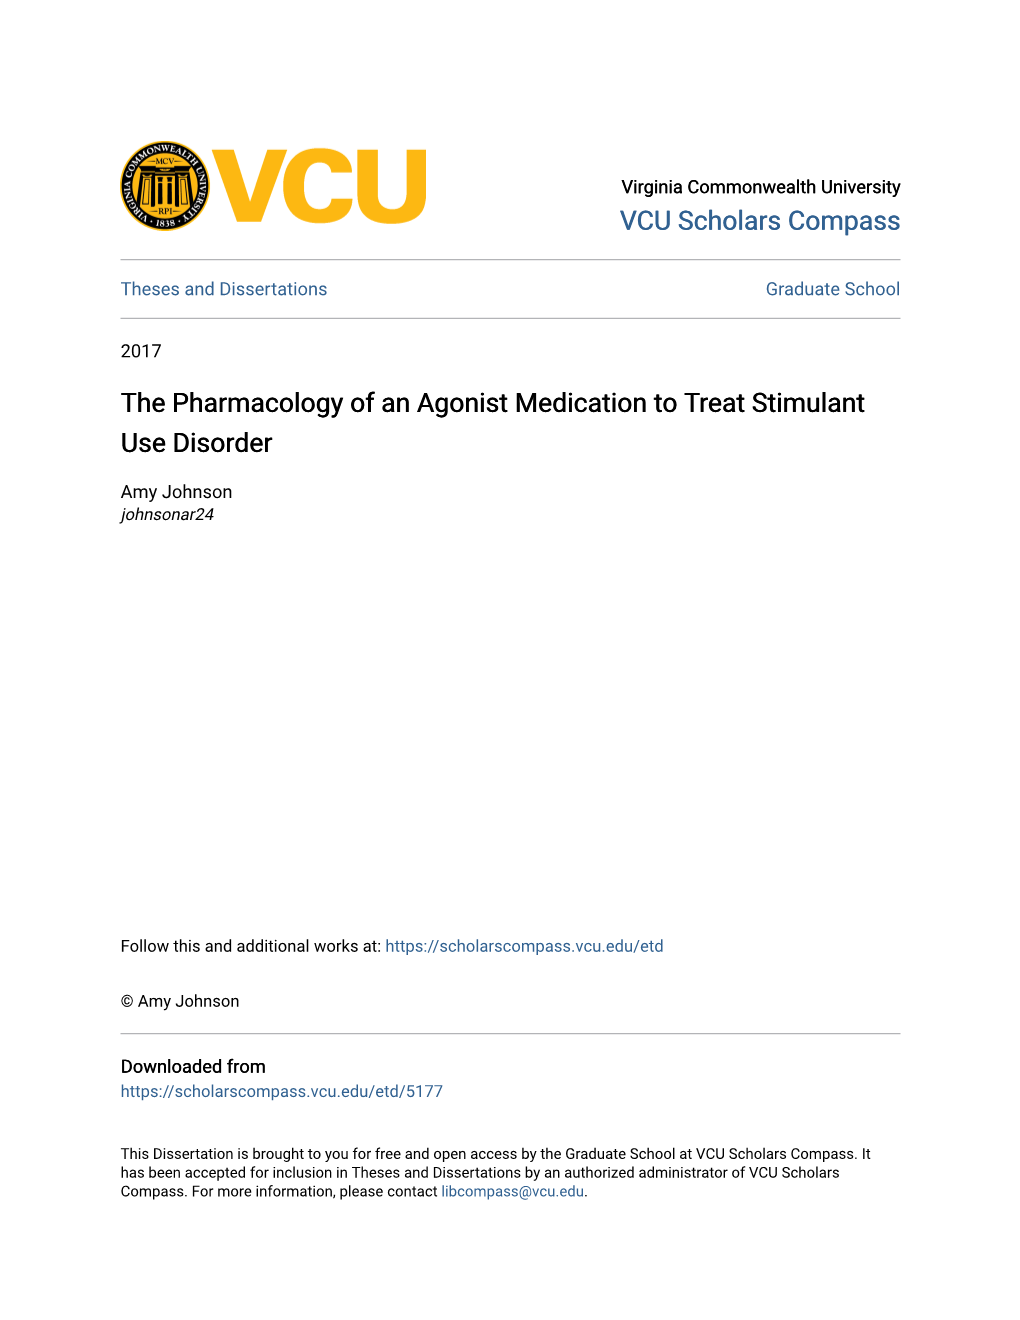 The Pharmacology of an Agonist Medication to Treat Stimulant Use Disorder